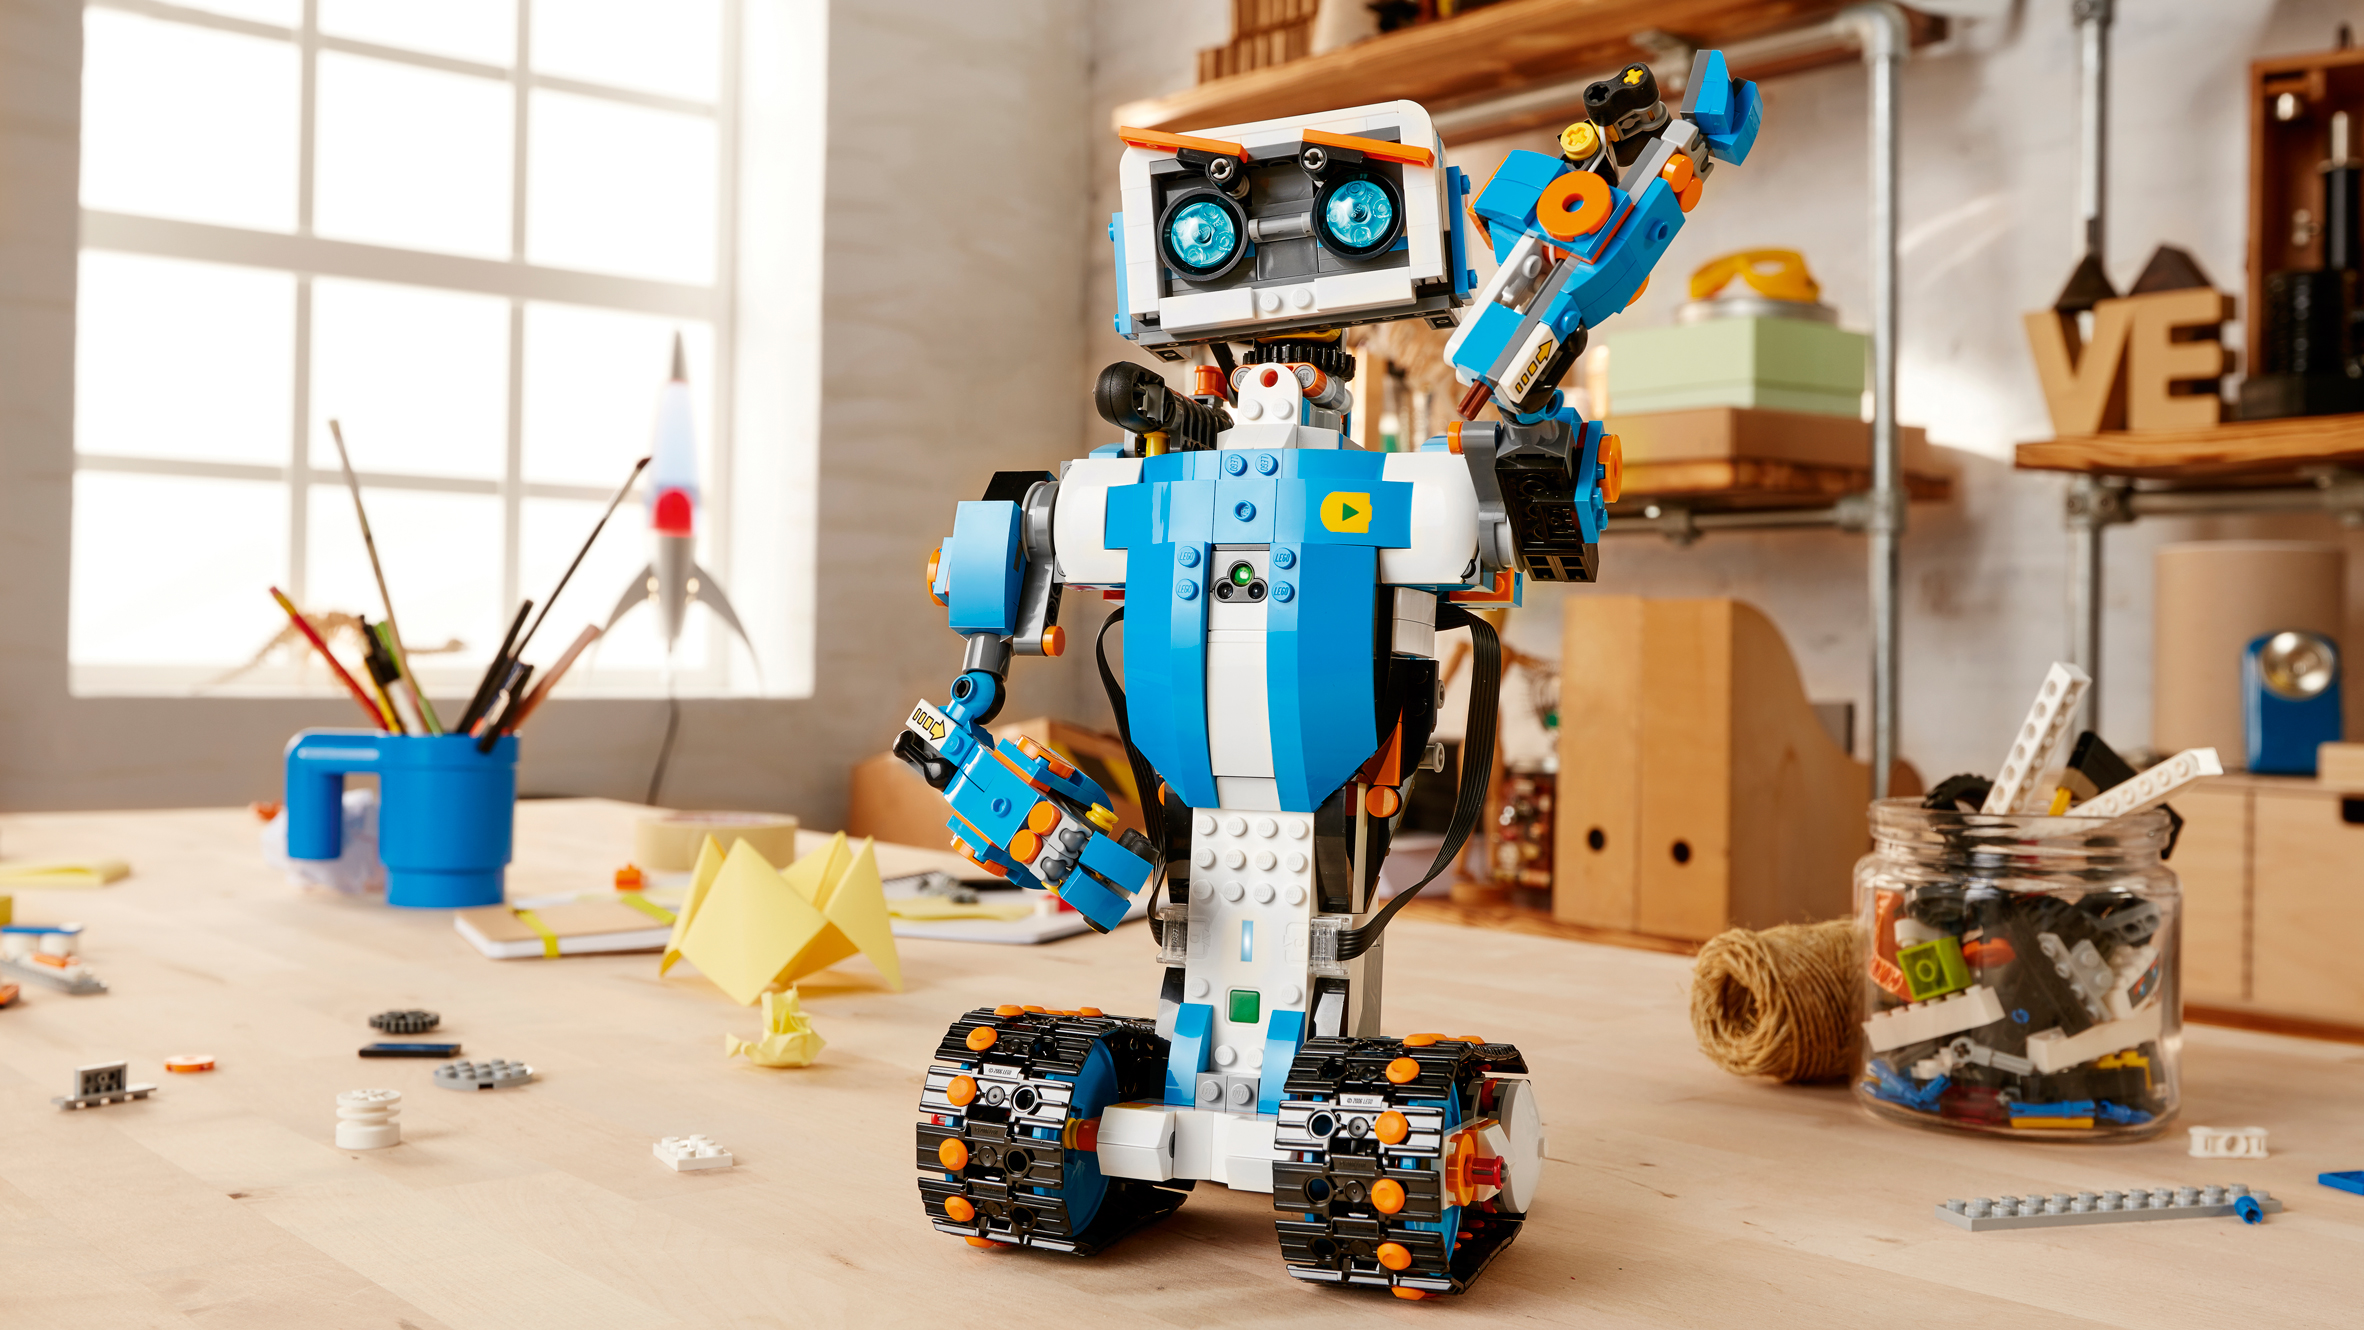 Lego unveils Boost kit to help children learn coding